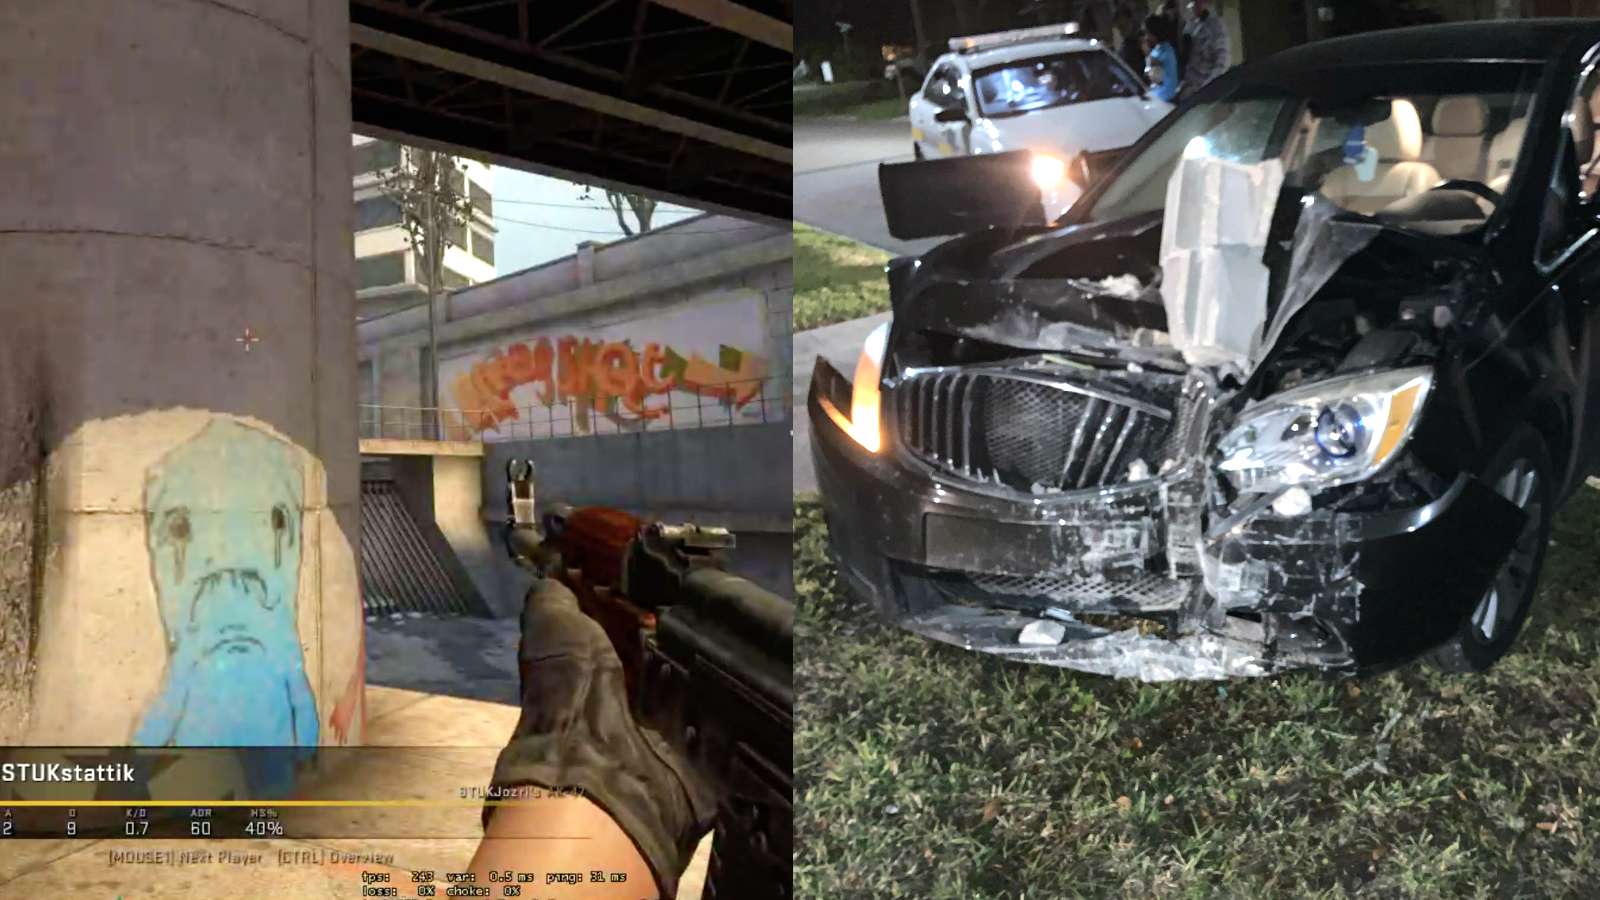 CSGO next to crashed car with police in background